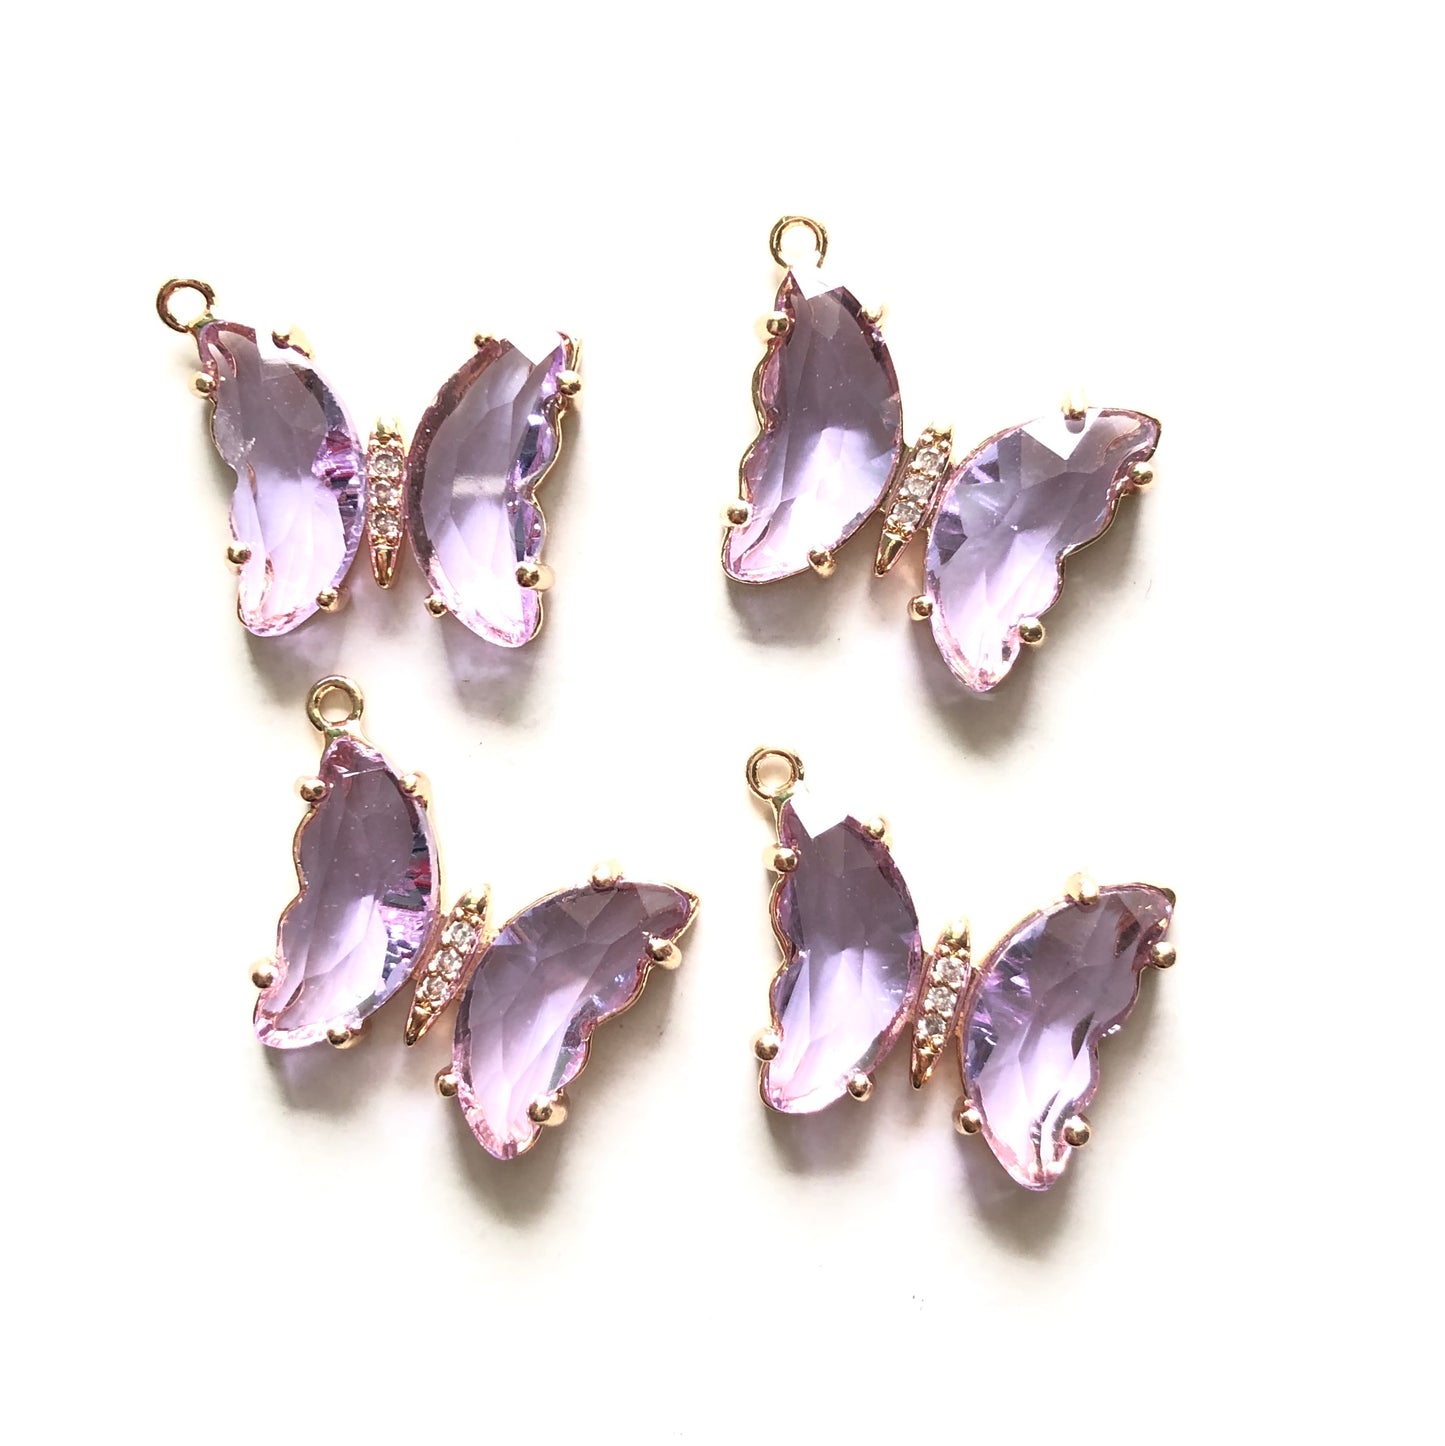 10pcs/lot 20*18mm Colorful Crystal Butterfly Charms Light Purple CZ Paved Charms Butterflies Charms Beads Beyond